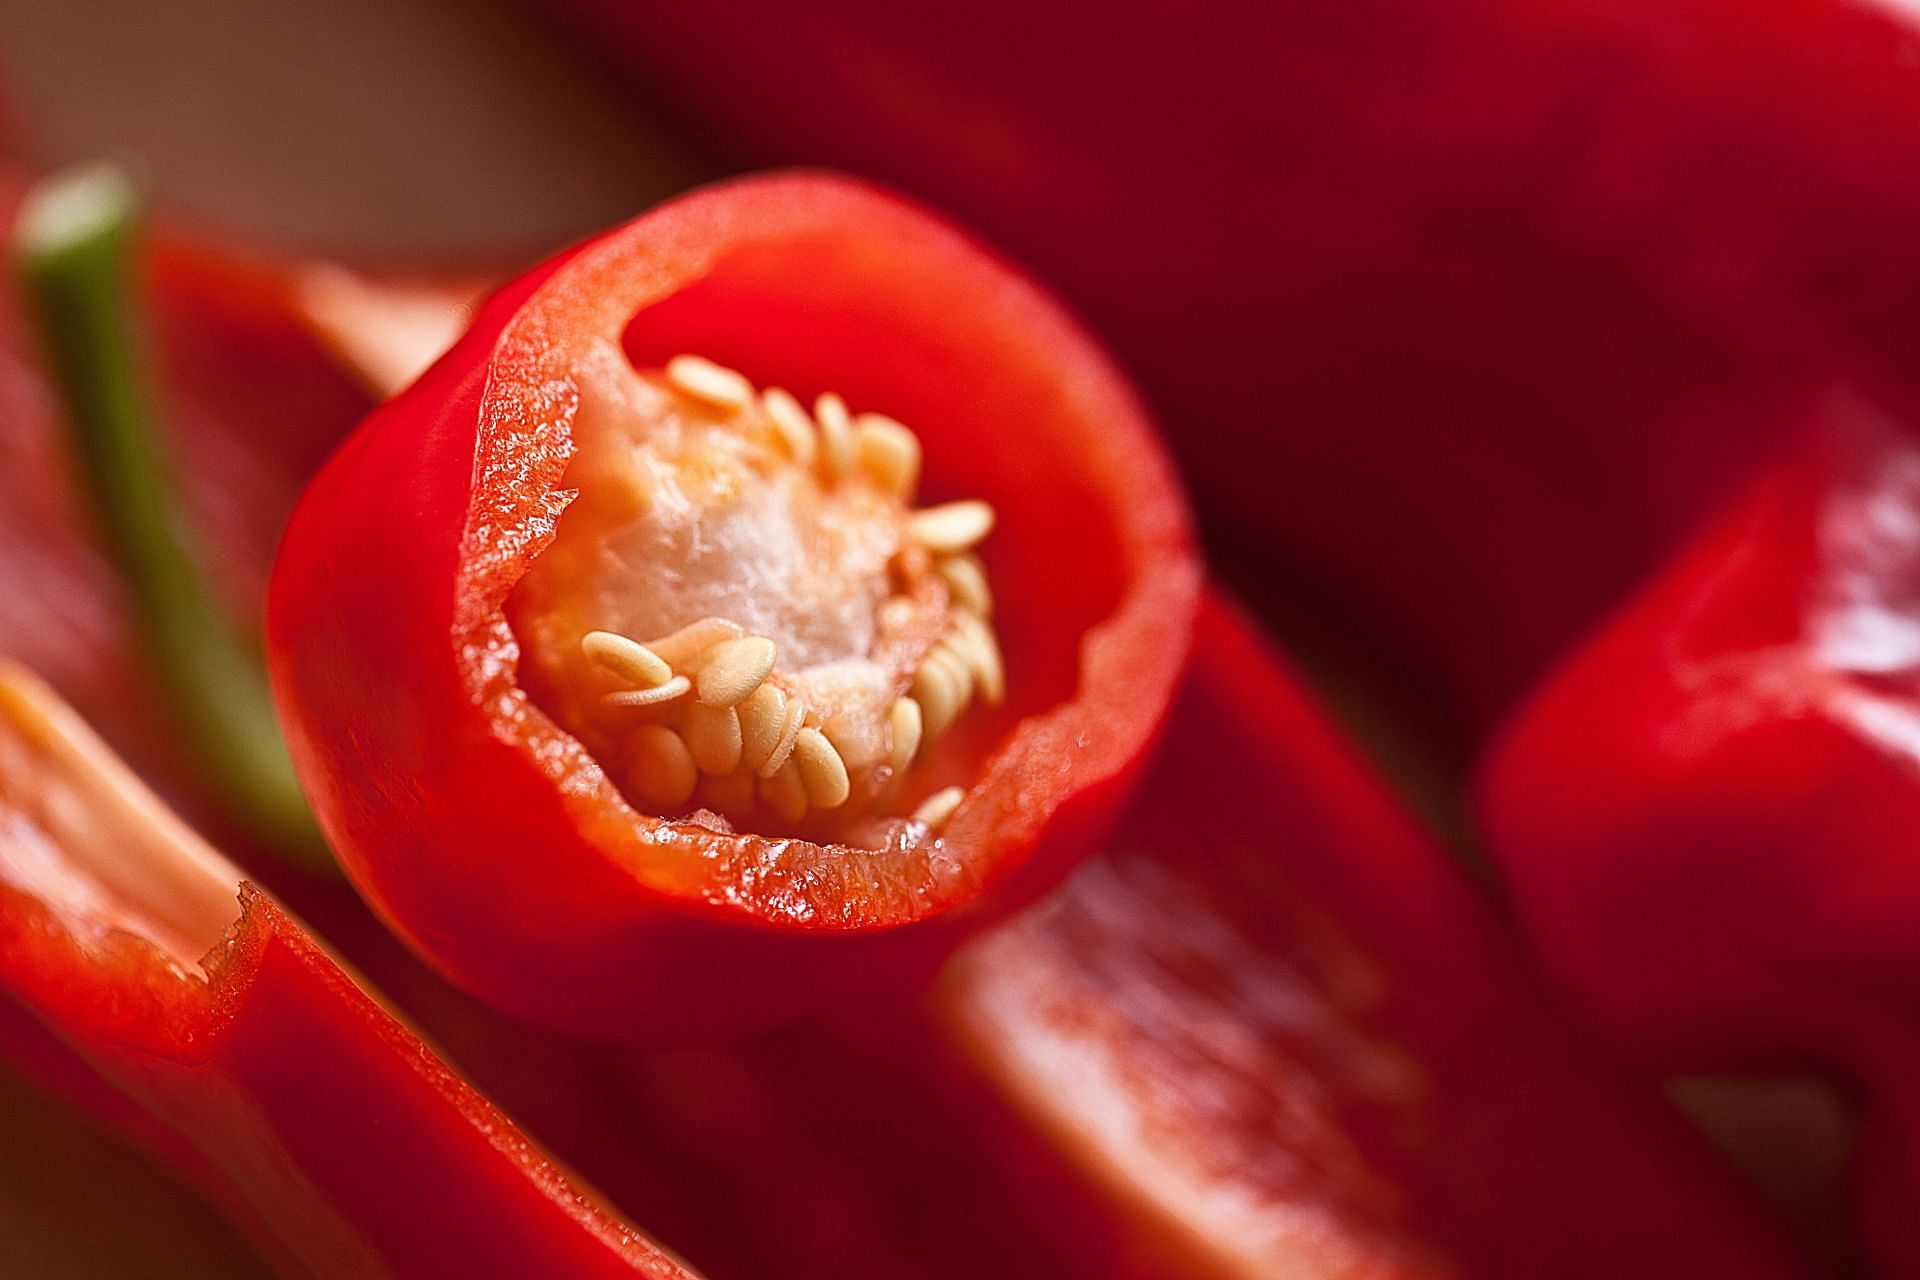 Cayenne pepper reduces inflammation and improves blood circulation. (Image via Pexels/Pixabay)